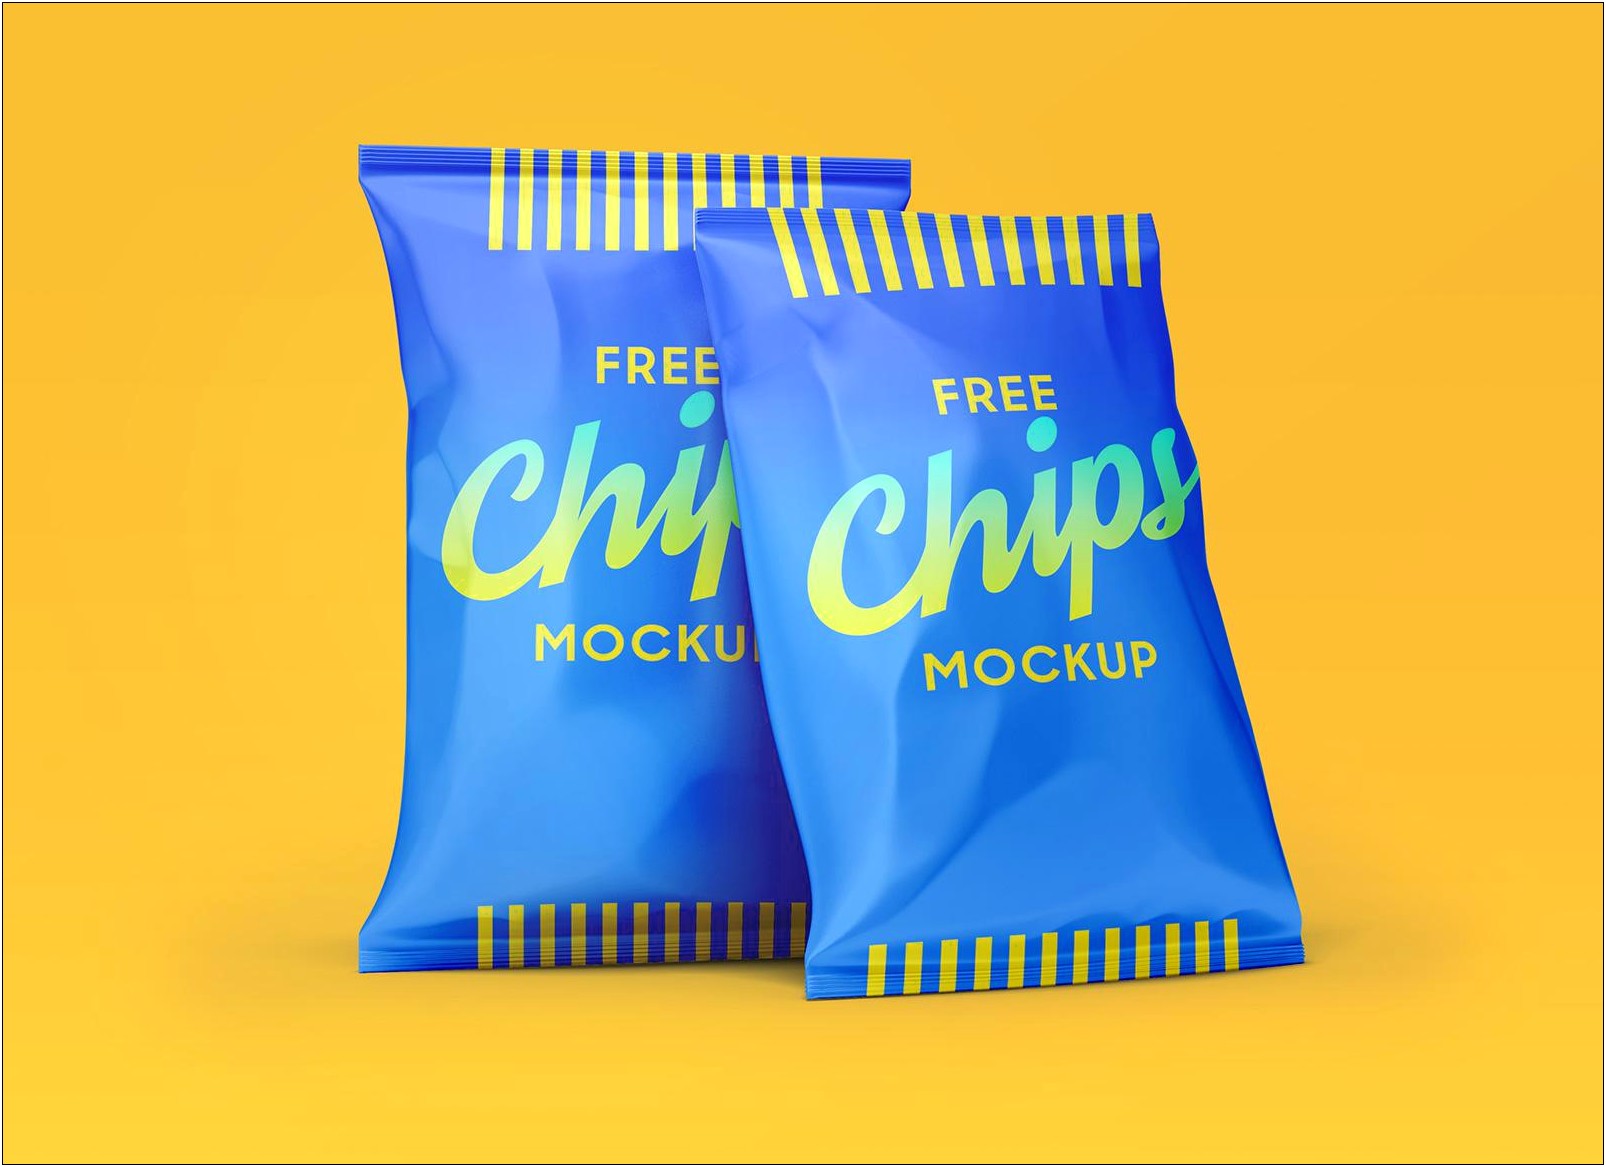 Chip Bag Template Free Download Psd